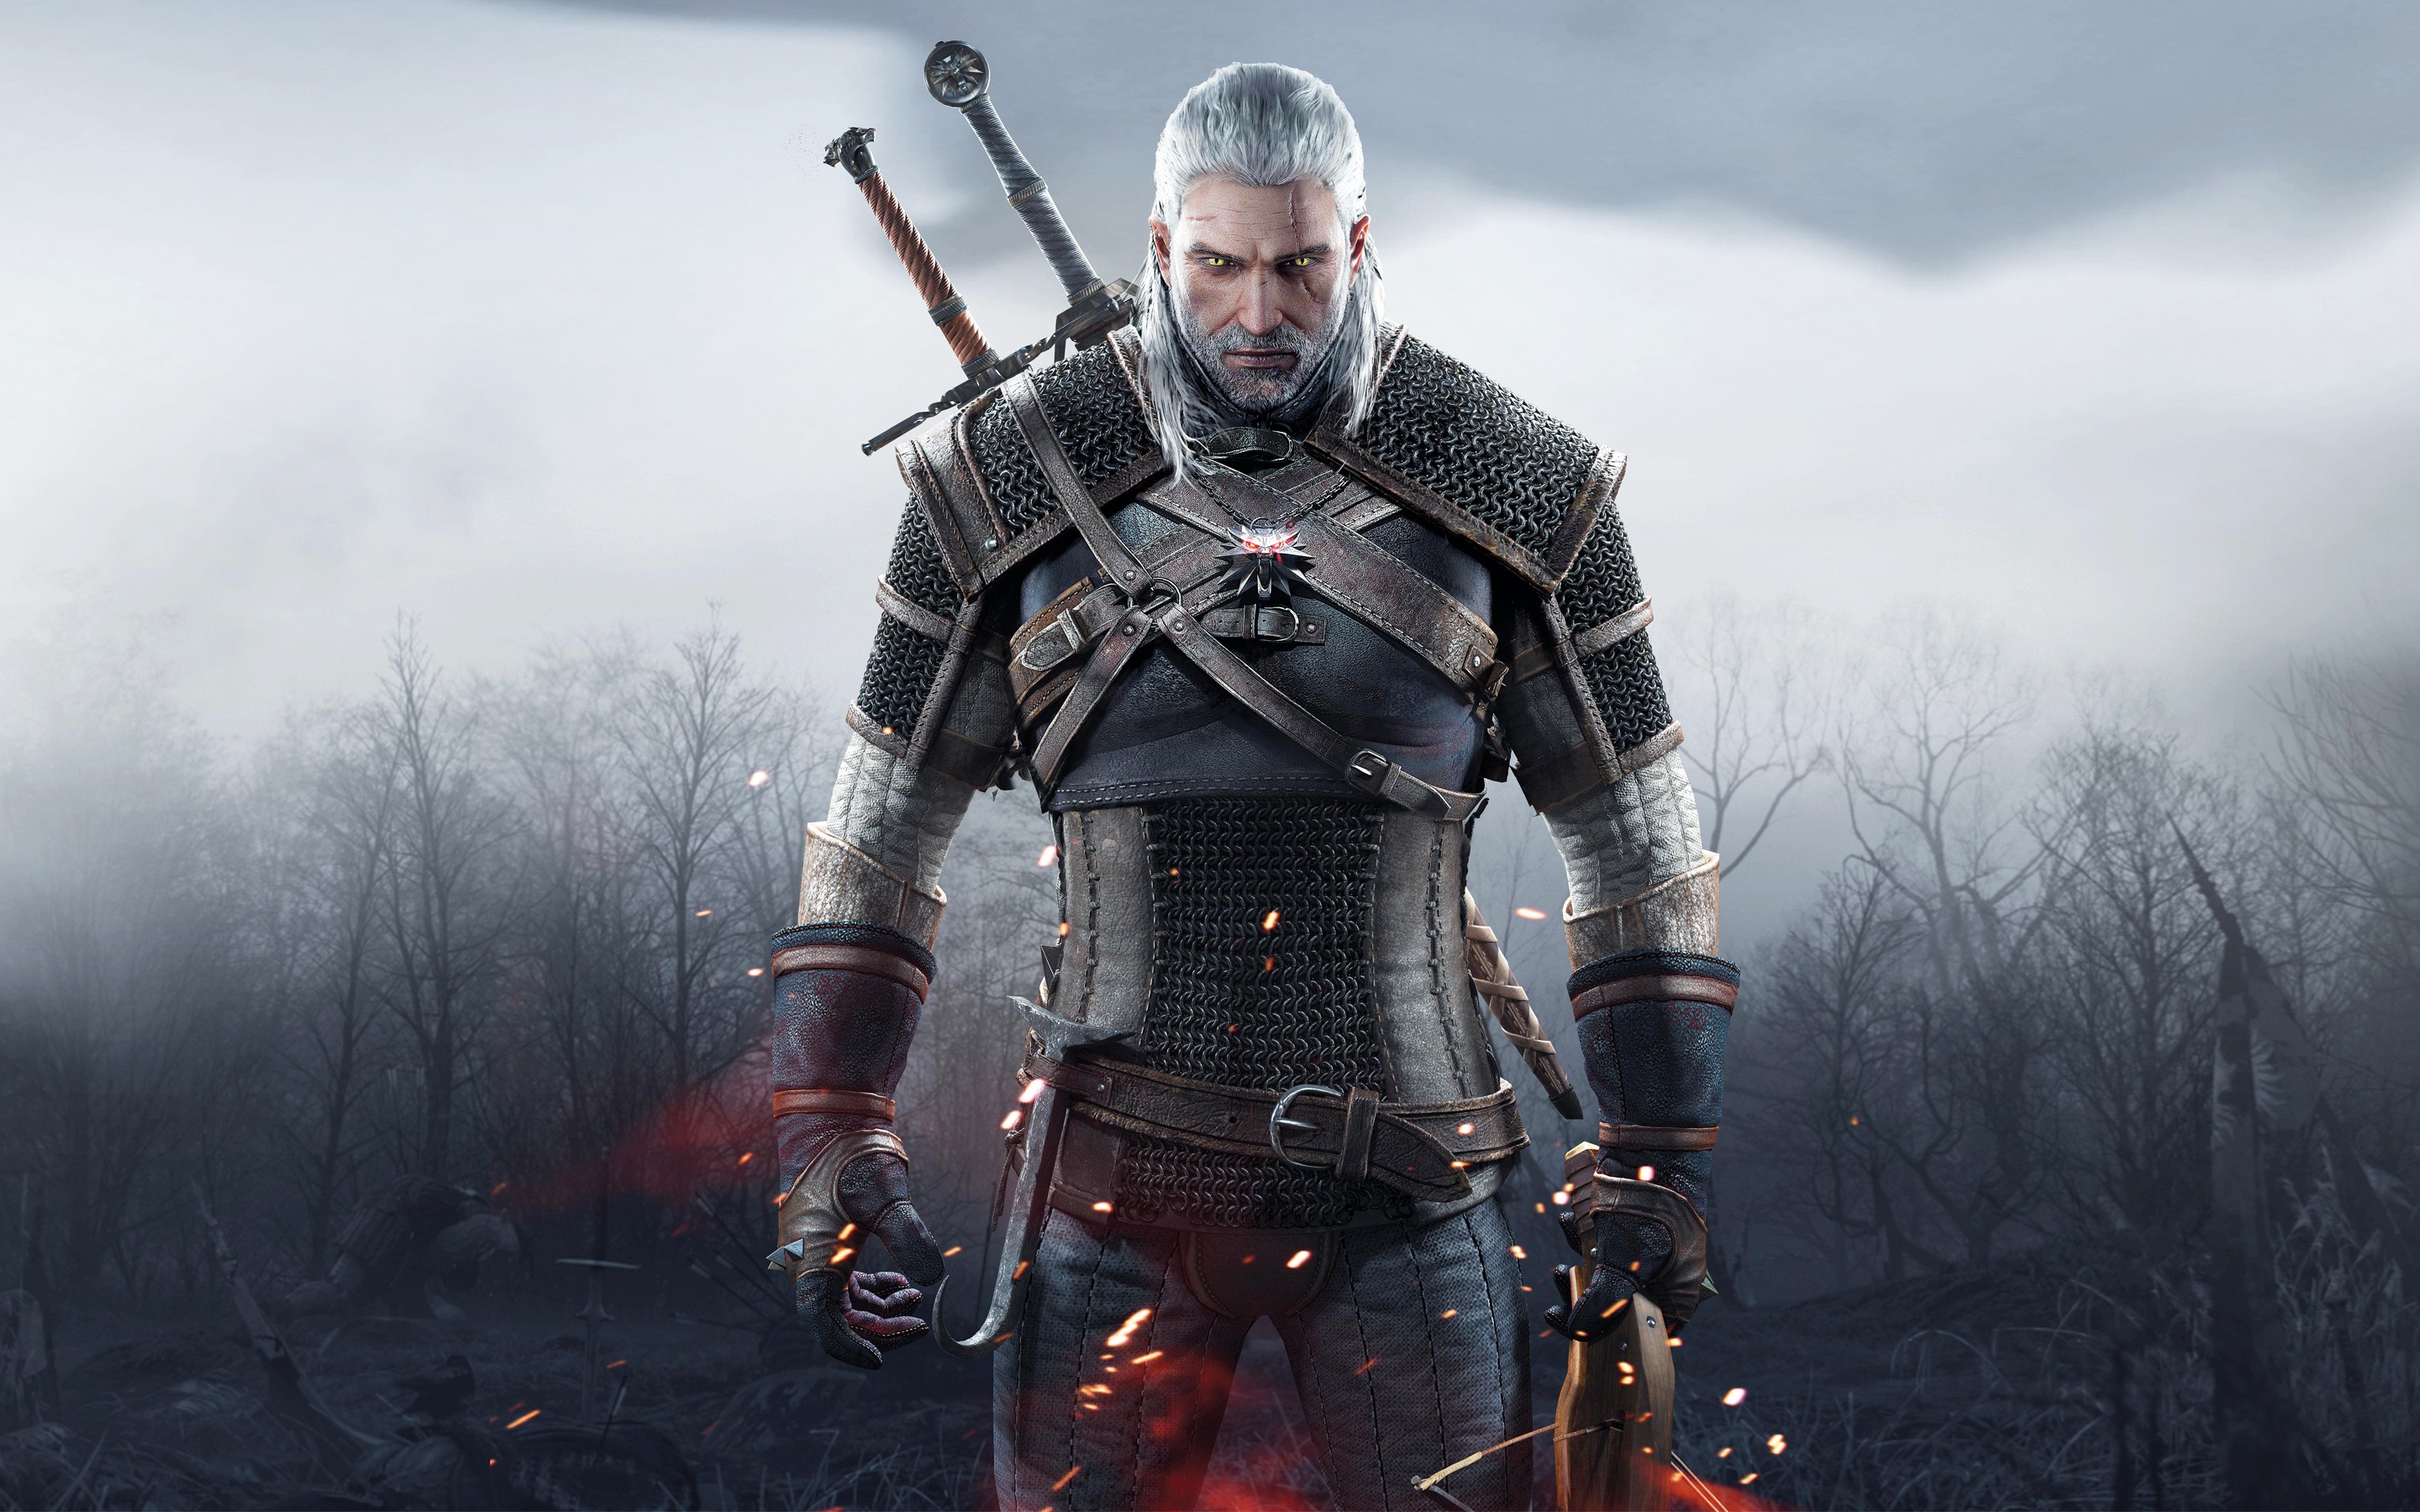 General 2880x1800 The Witcher 3: Wild Hunt video games The Witcher Geralt of Rivia frontal view RPG PC gaming video game characters video game men